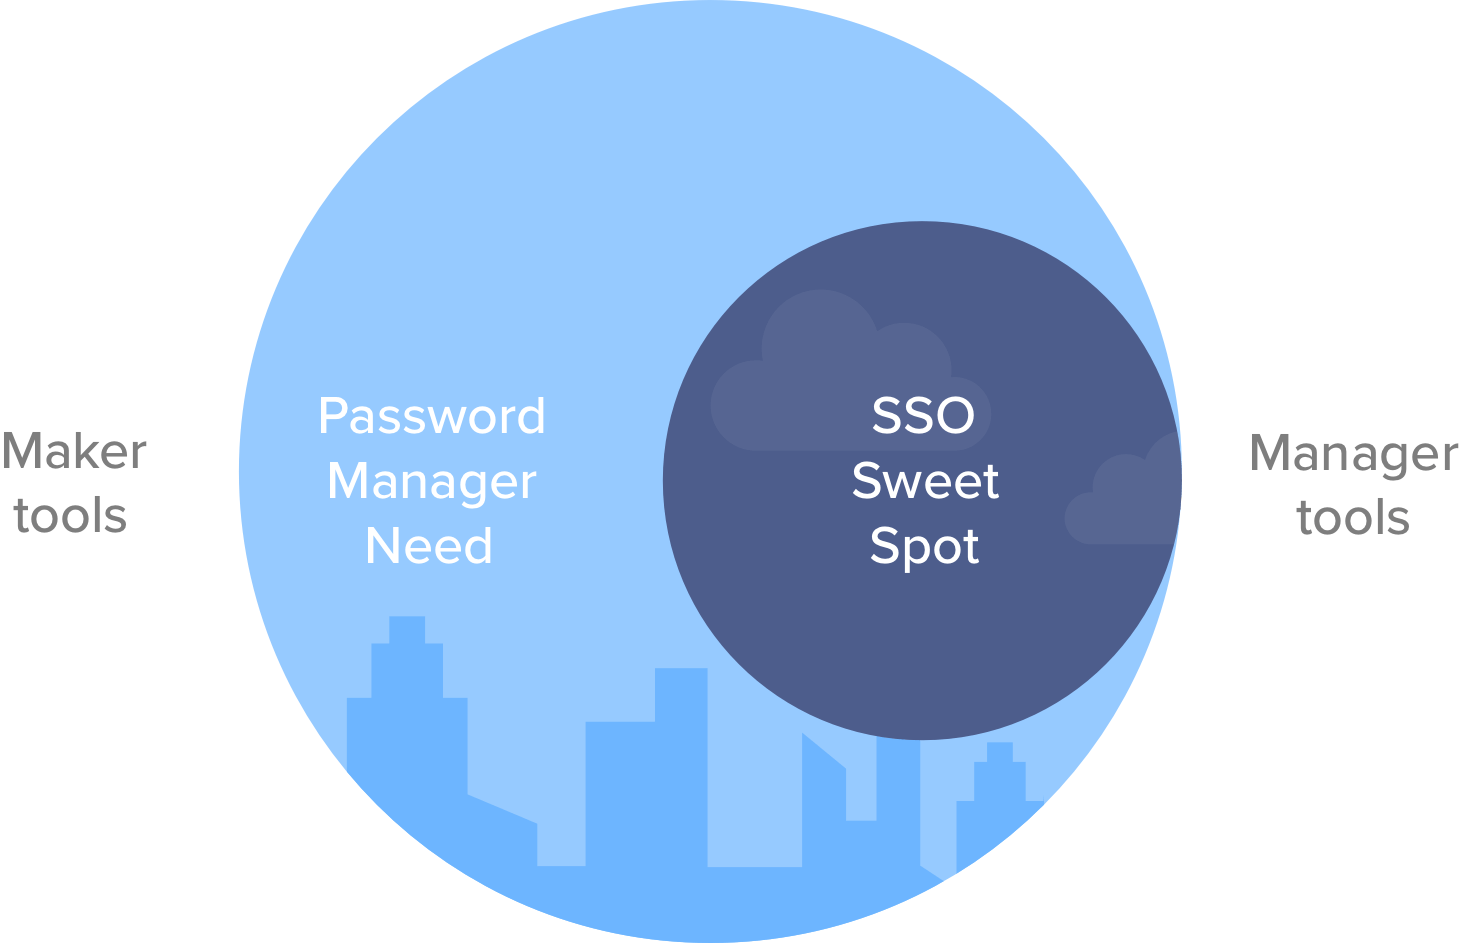 Illustration: A Venn diagram shows a small circle labelled manager tools within a larger circle labelled maker tools. The manager tools, also shared with all makers, are highlighted as the sweet spot for SSO. The remaining maker tools are identified as where a password manager is needed.